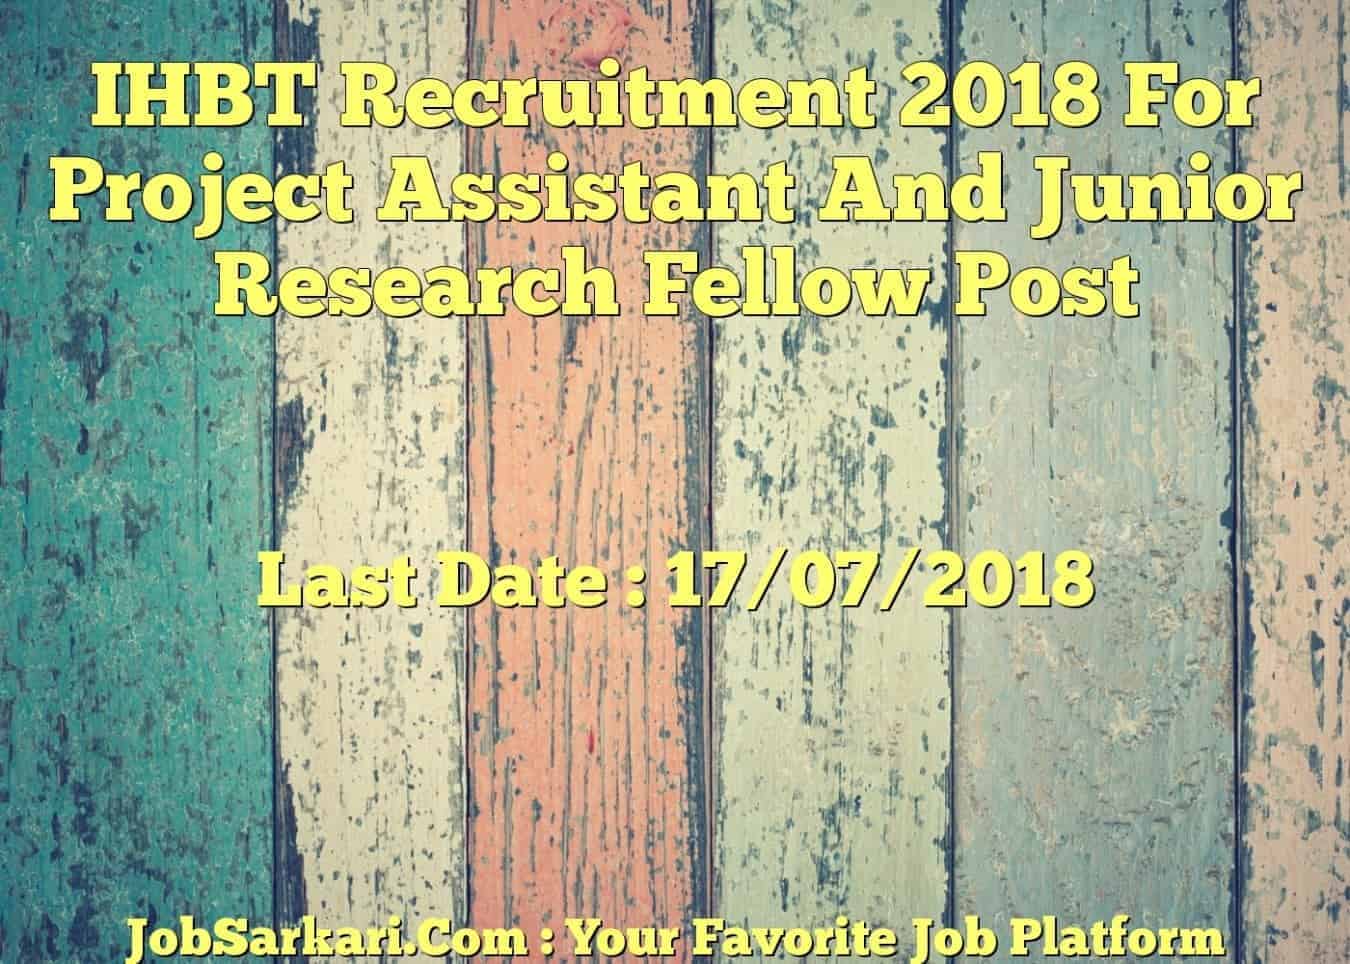 IHBT Recruitment 2018 For Project Assistant And Junior Research Fellow Post